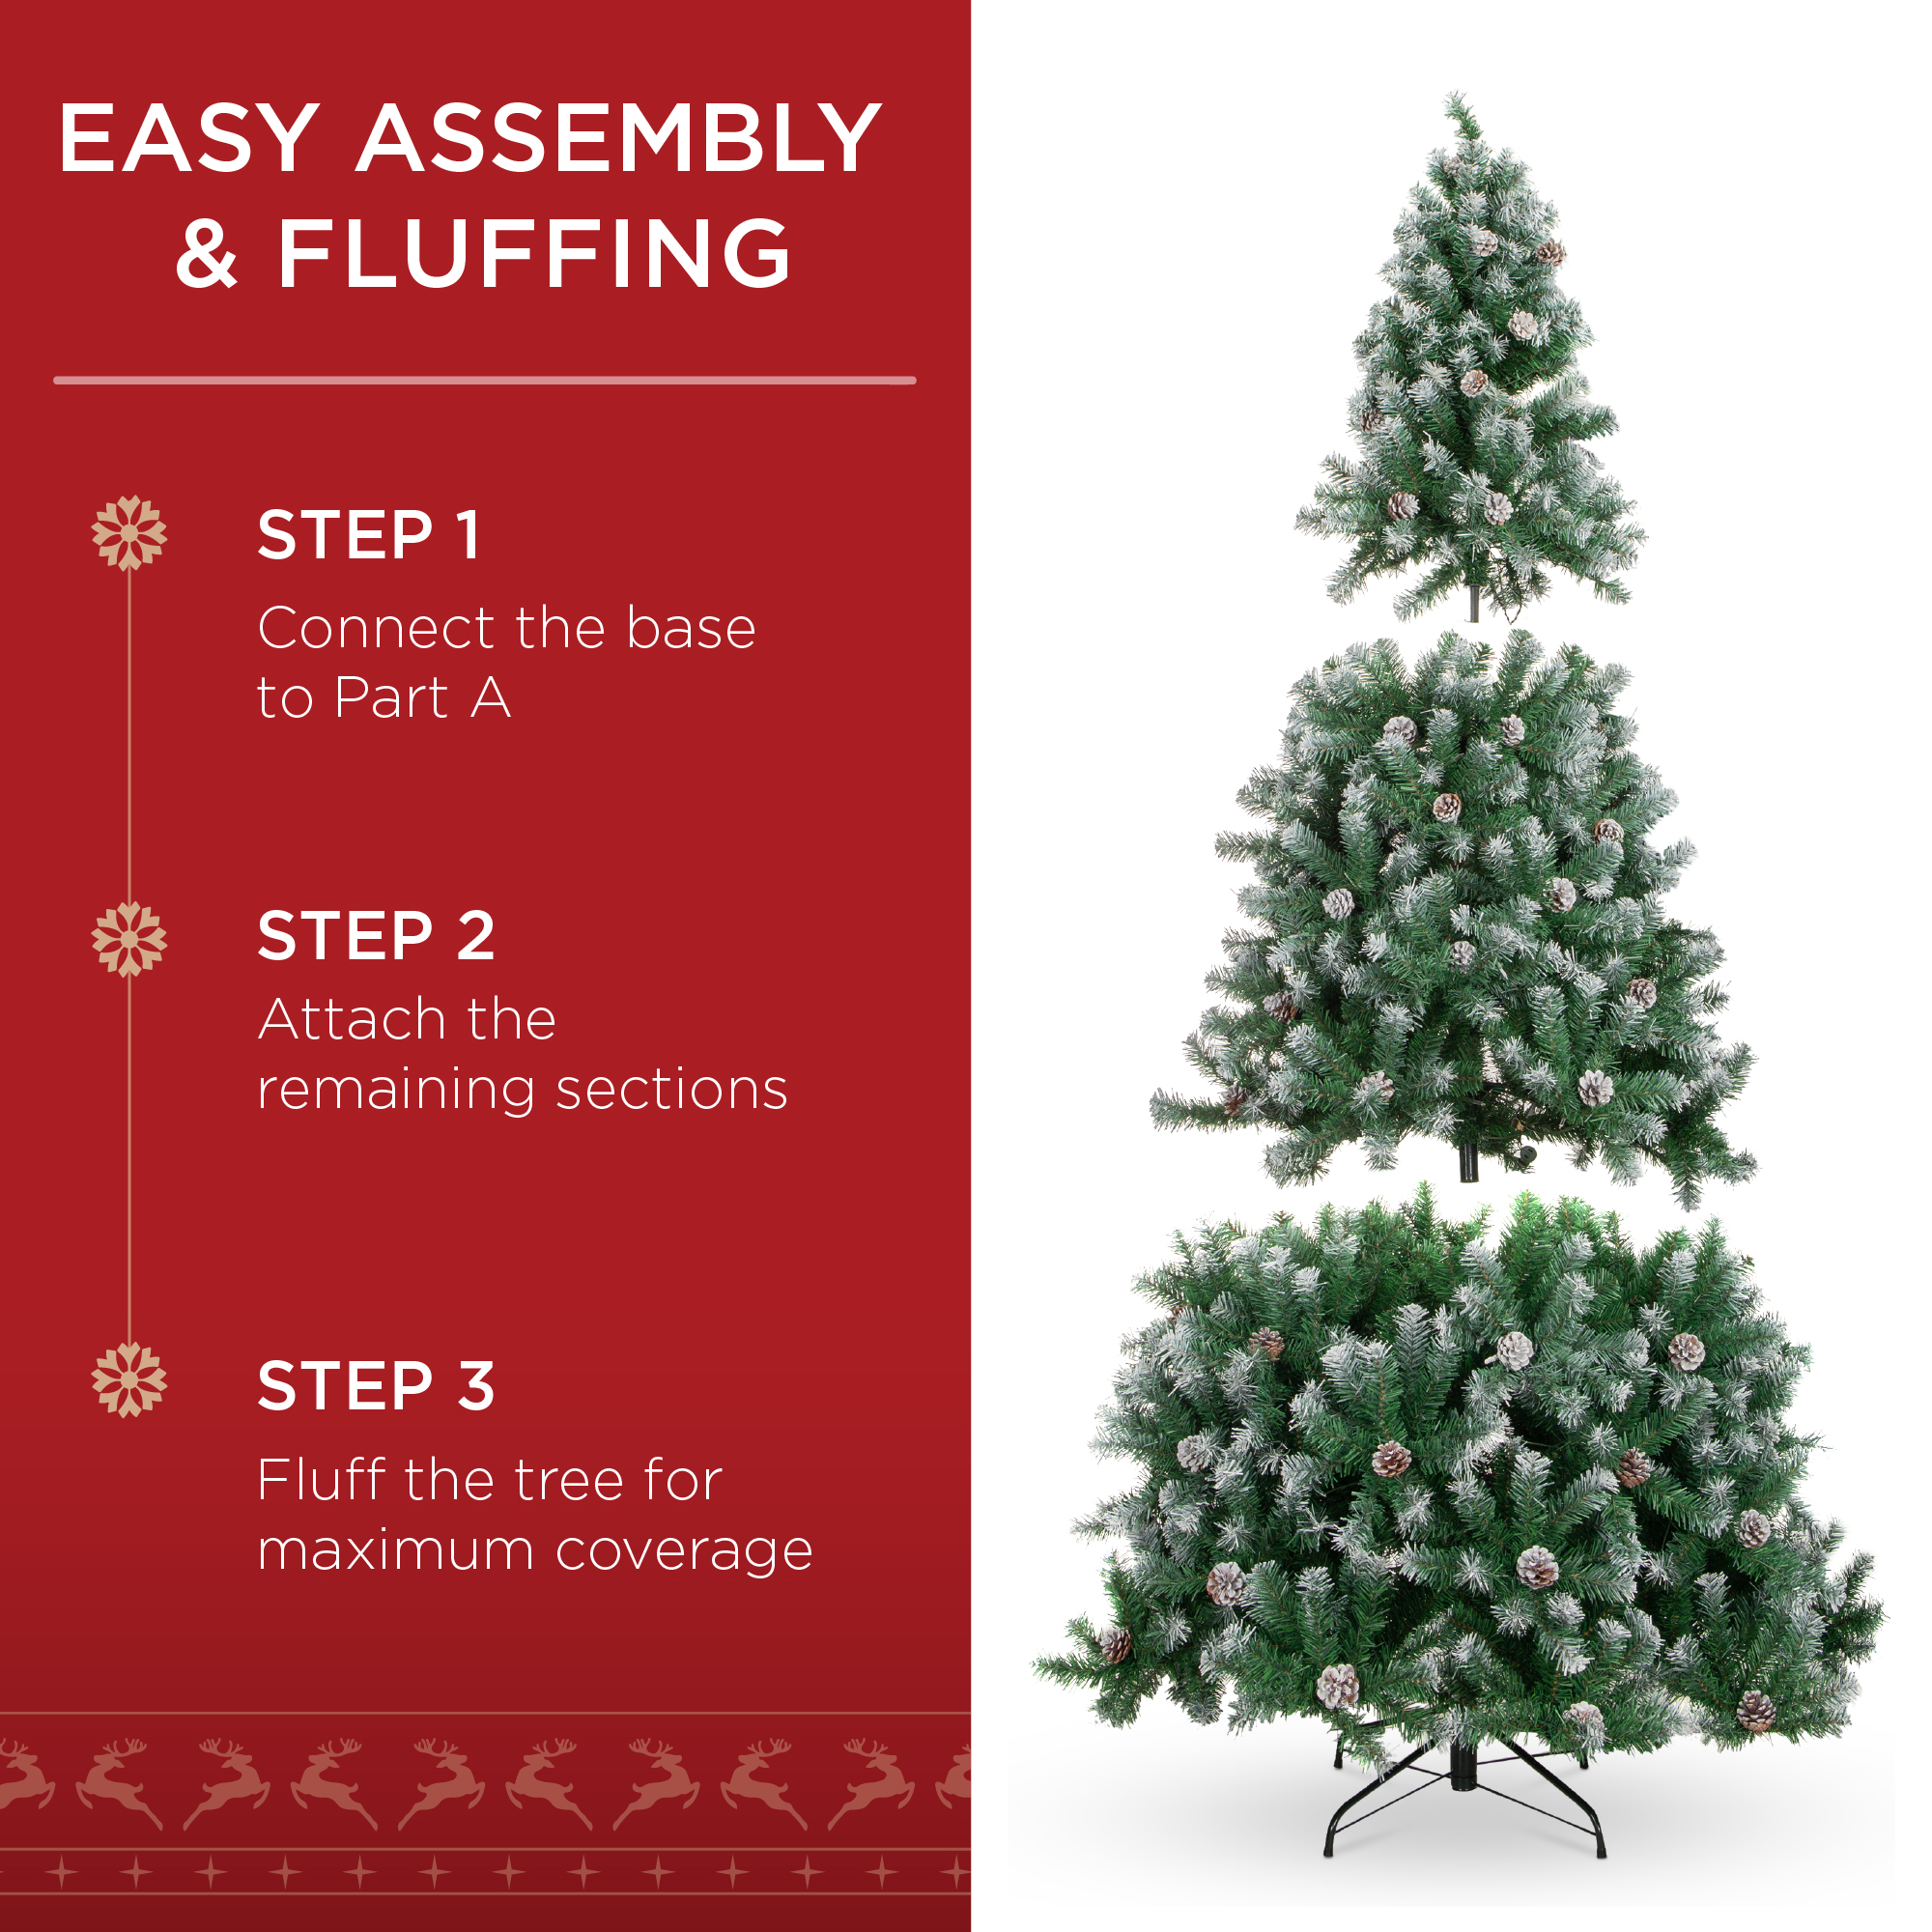 Best Choice Products 6ft Pre-Lit Pre-Decorated Holiday Christmas Tree w/ 1,000 Flocked Tips, 250 Lights, Metal Base - image 4 of 7